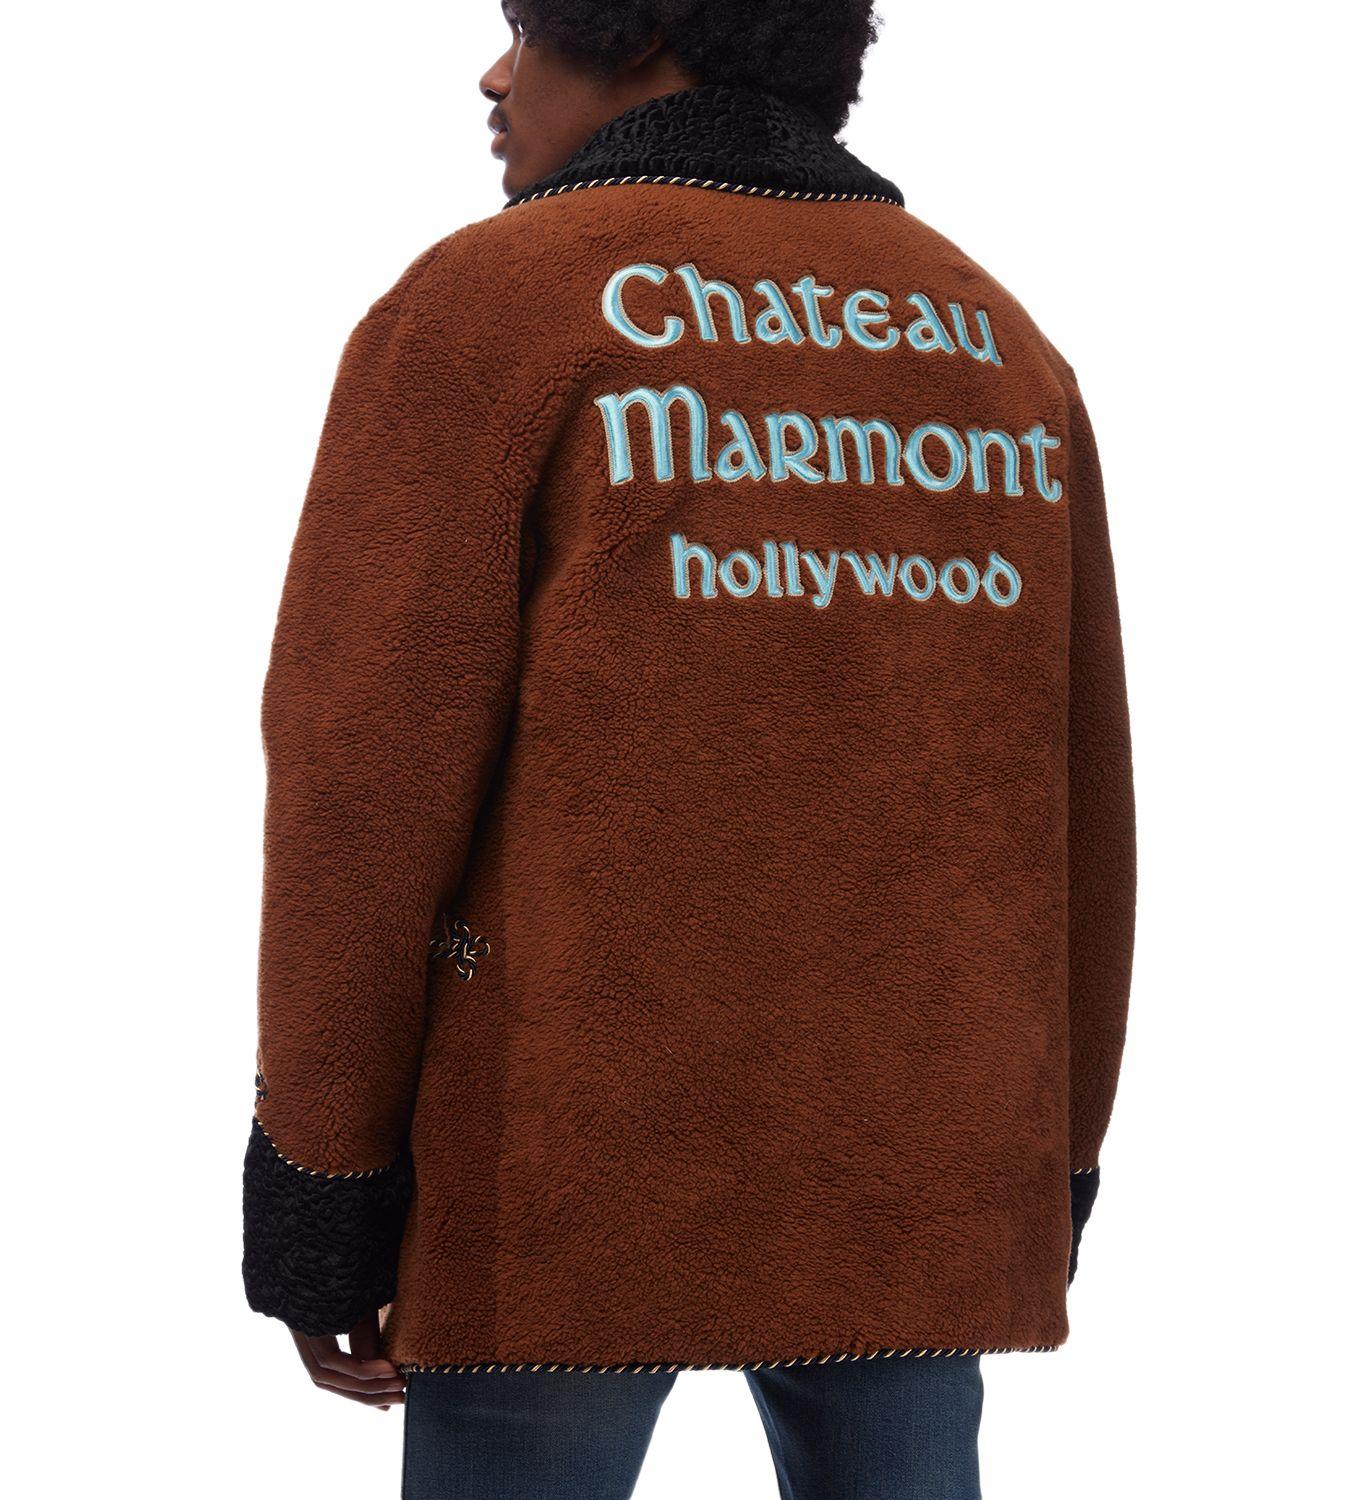 Gucci Chateau Marmont Hollywood Wool Coat in Brown for Men | Lyst